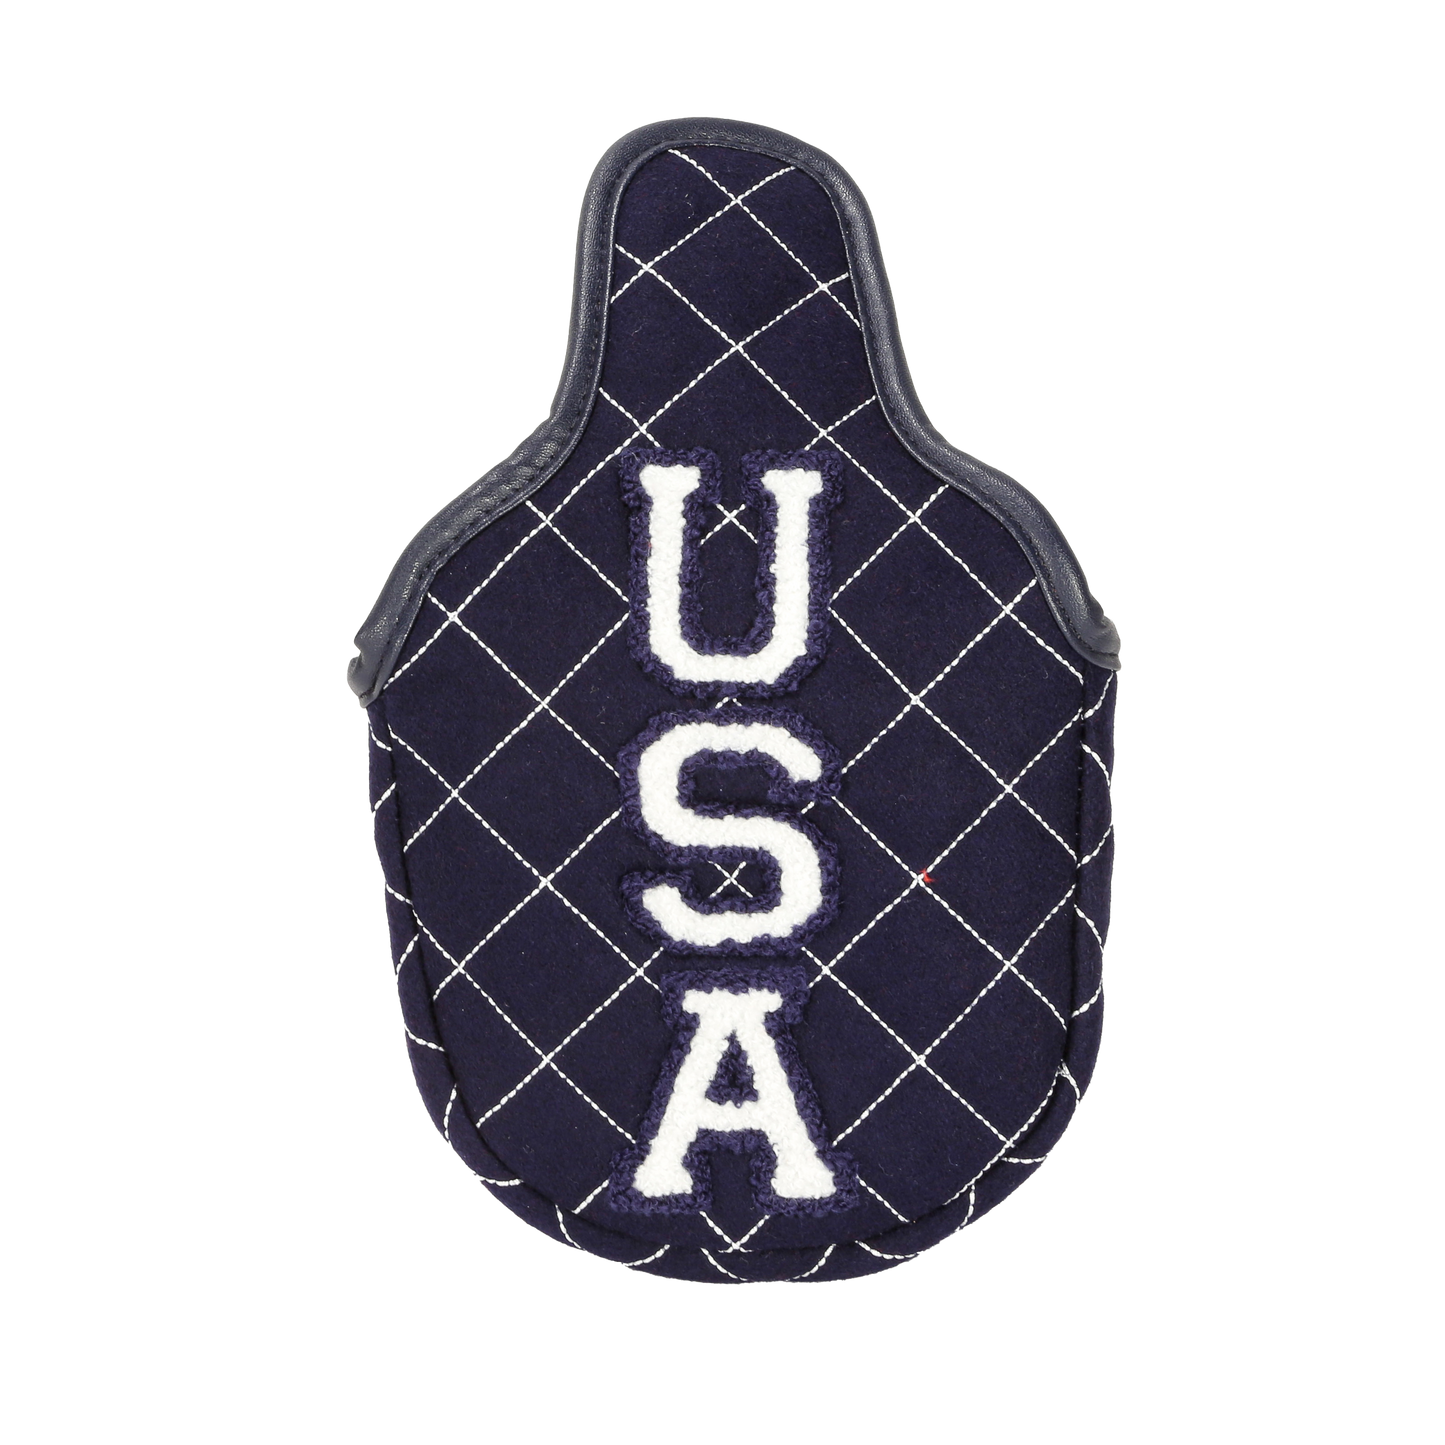 USA Quilted Mallet Putter Cover